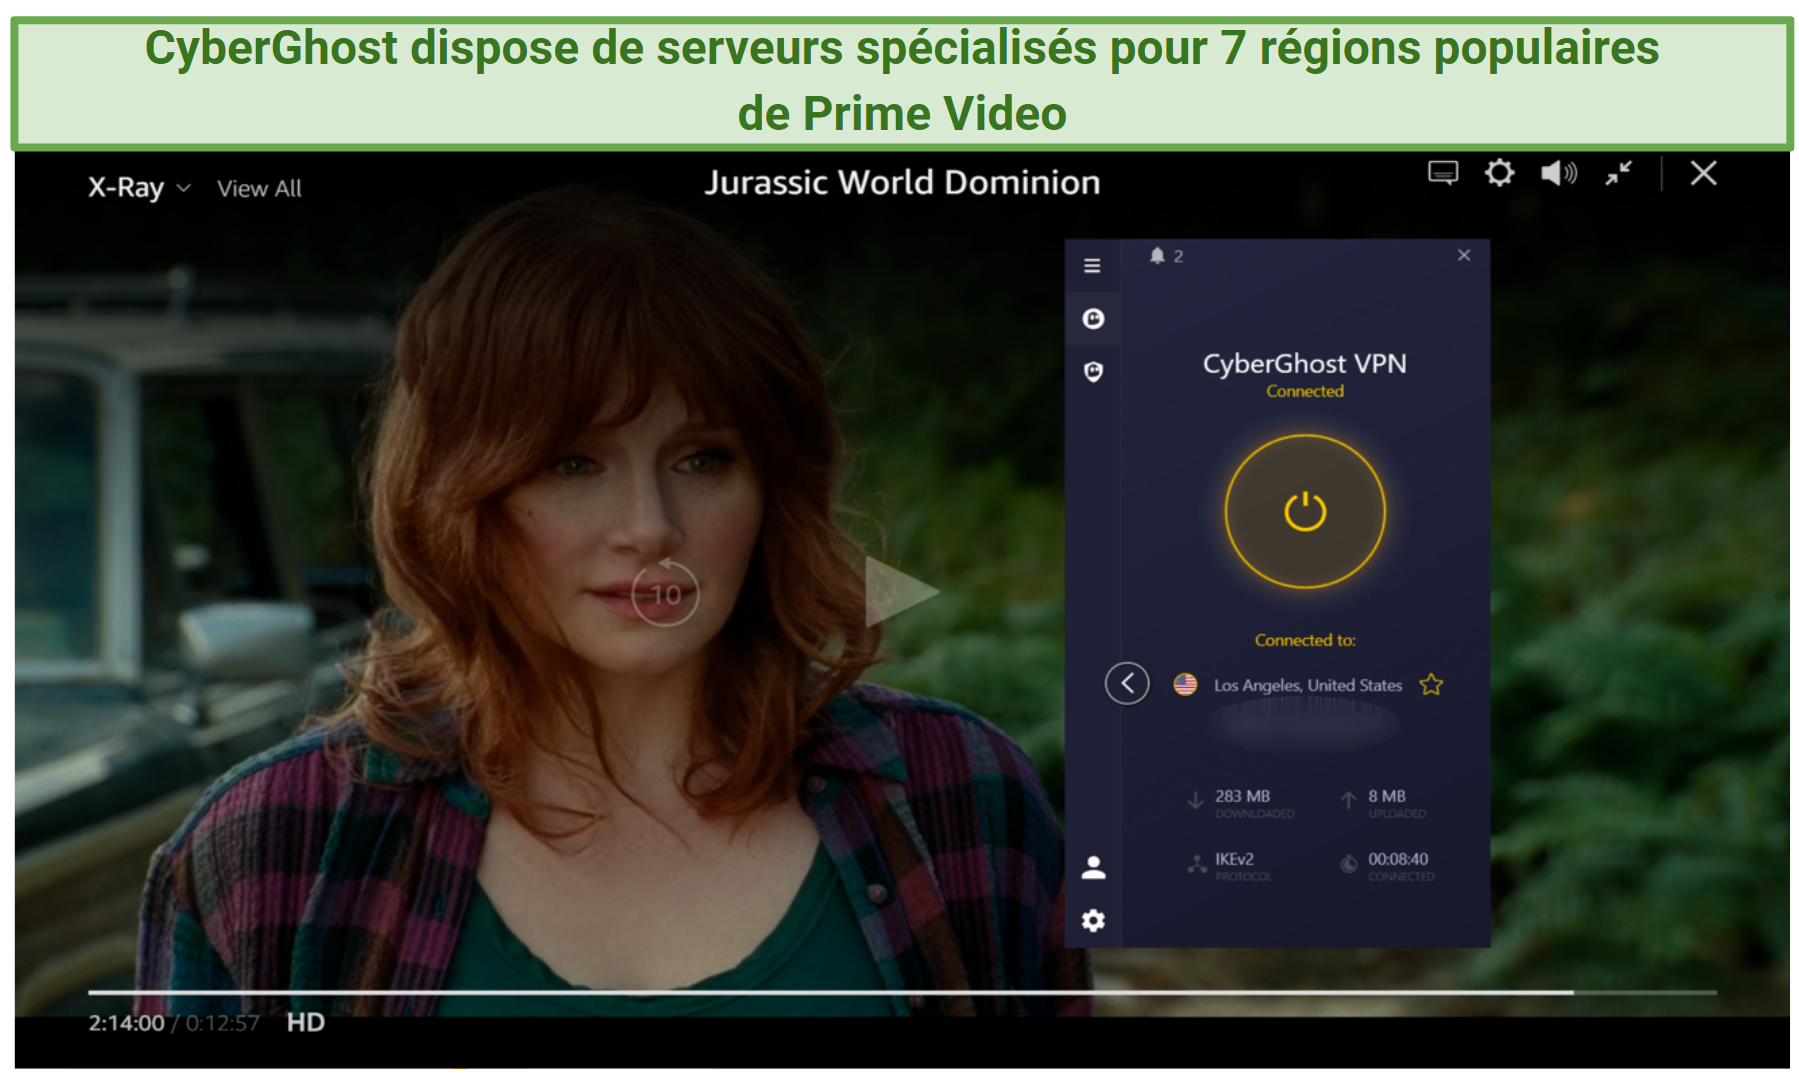 Screenshot of Jurassic World Dominion streaming on Amazon Prime Video with CyberGhost's specialty US server